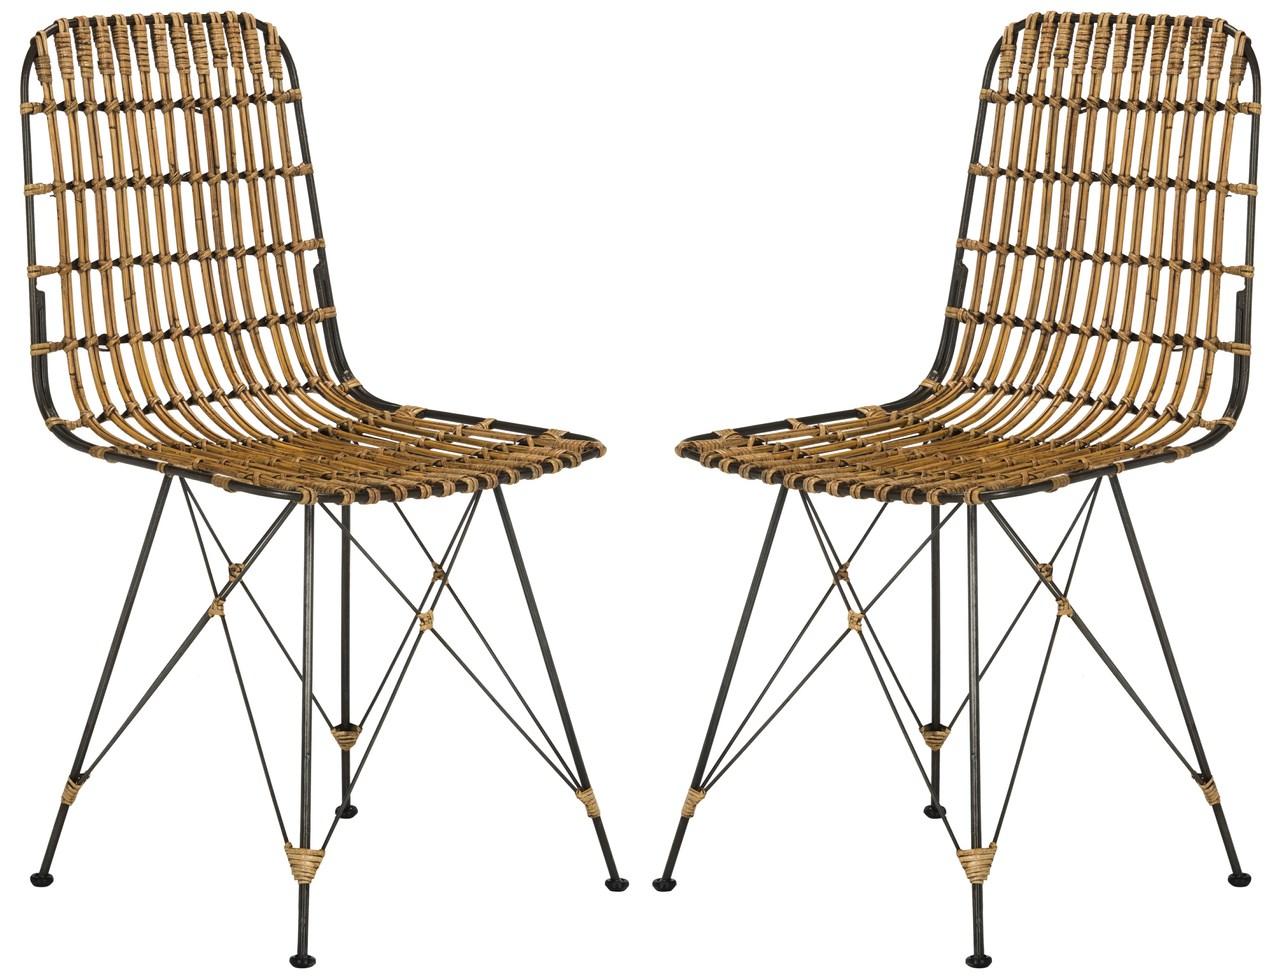 Minerva Wicker Dining Chair Black Metal with Natural Brown Wash (Set of 2) 116CDR